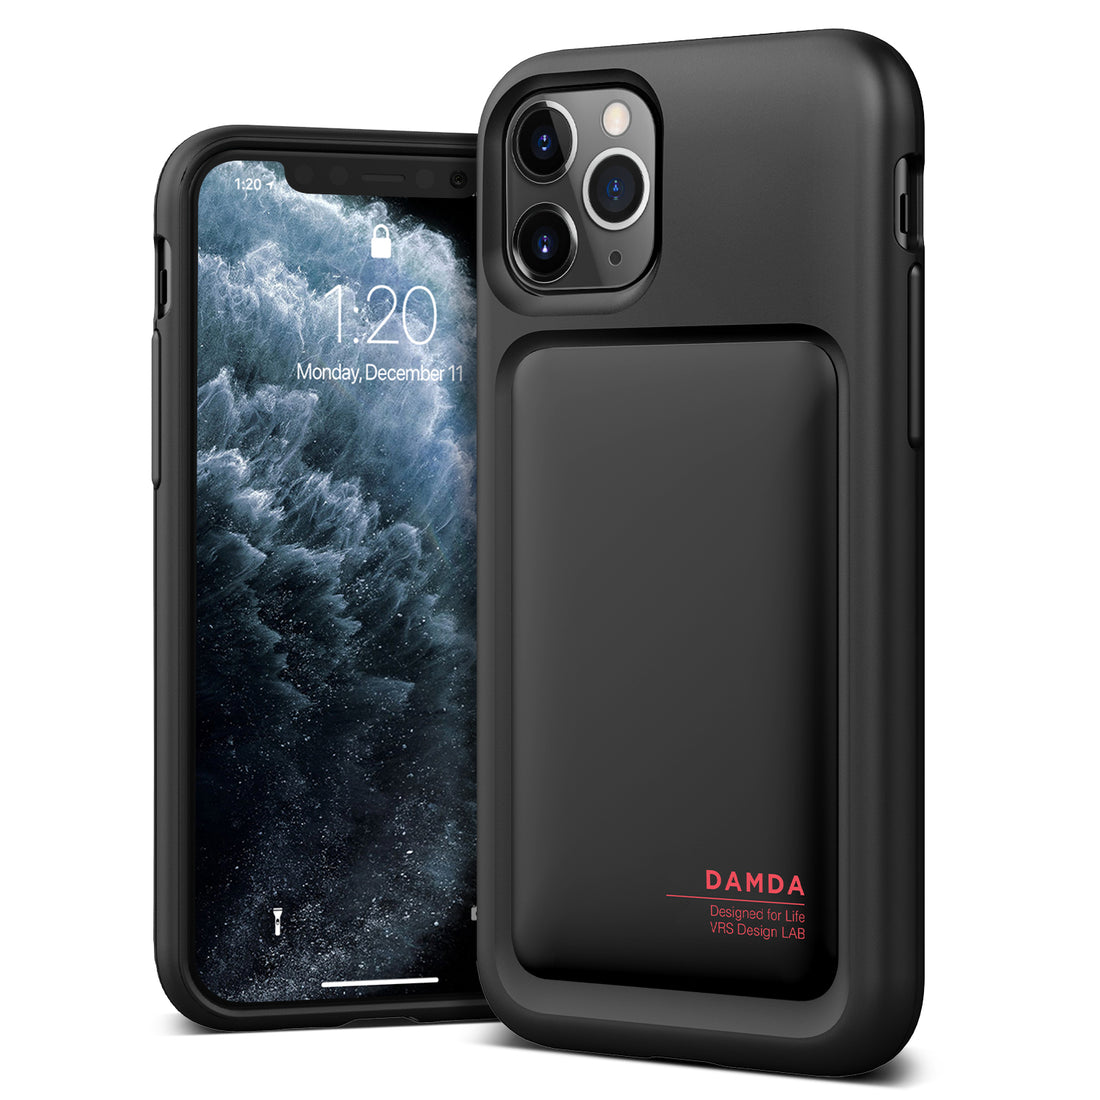 iPhone 11 Pro Case Damda High Pro Shield Matte Black High quality TPU material for extreme drop protection with shockproof.